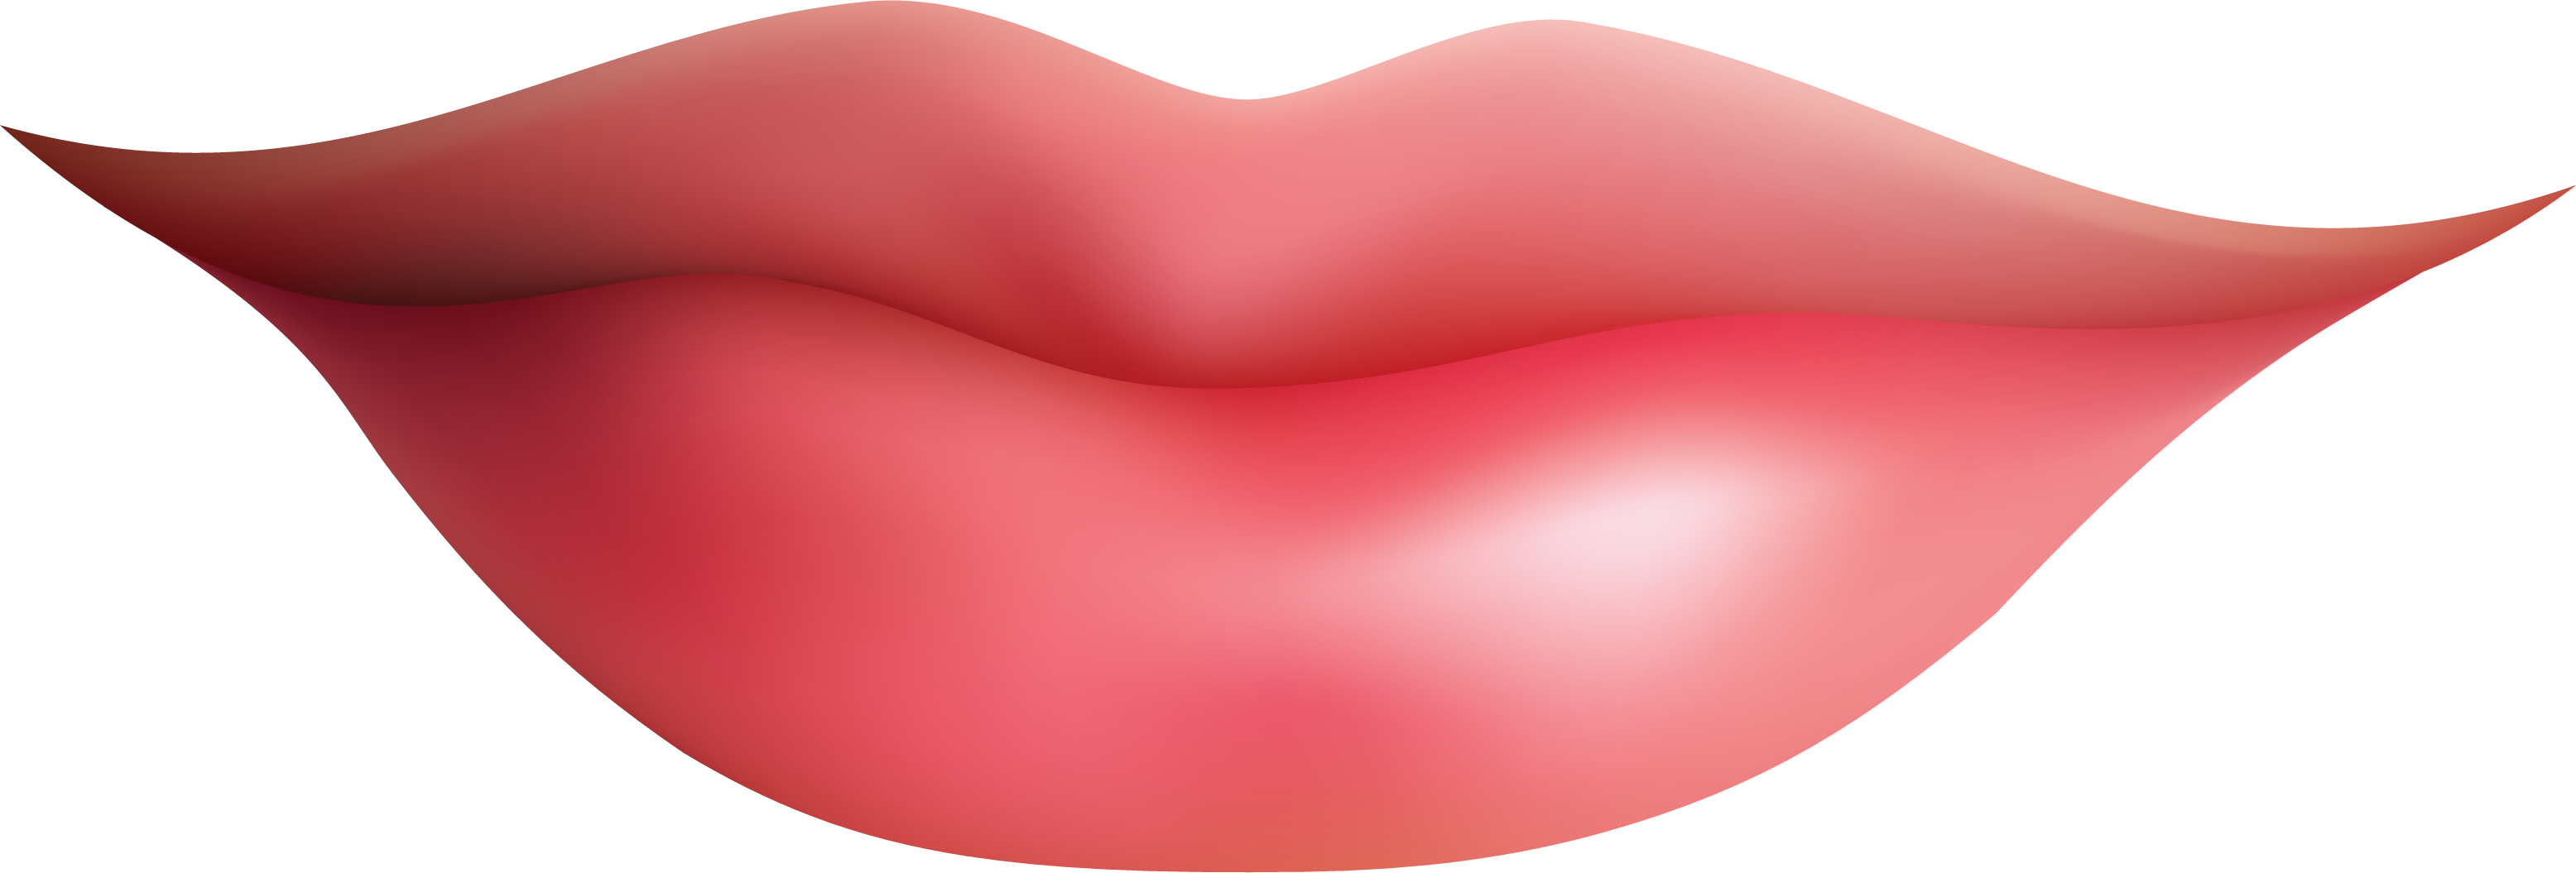 Clipart Lips Image Free Download Clipart